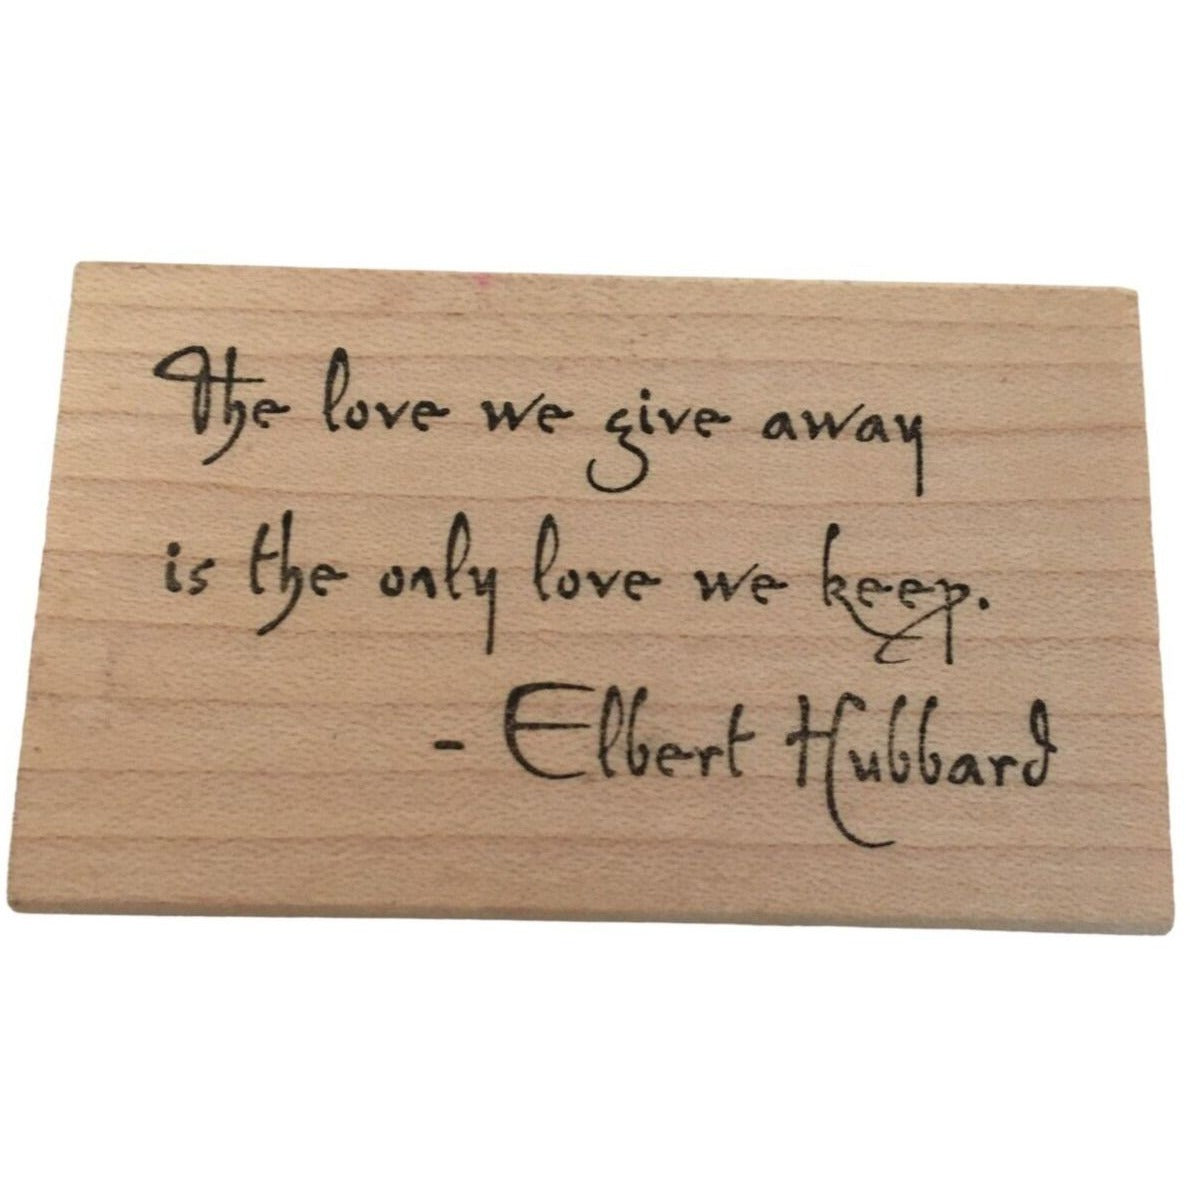 Rubber Soul Rubber Stamp The Love We Give Away is the Only Love We Keep Quote